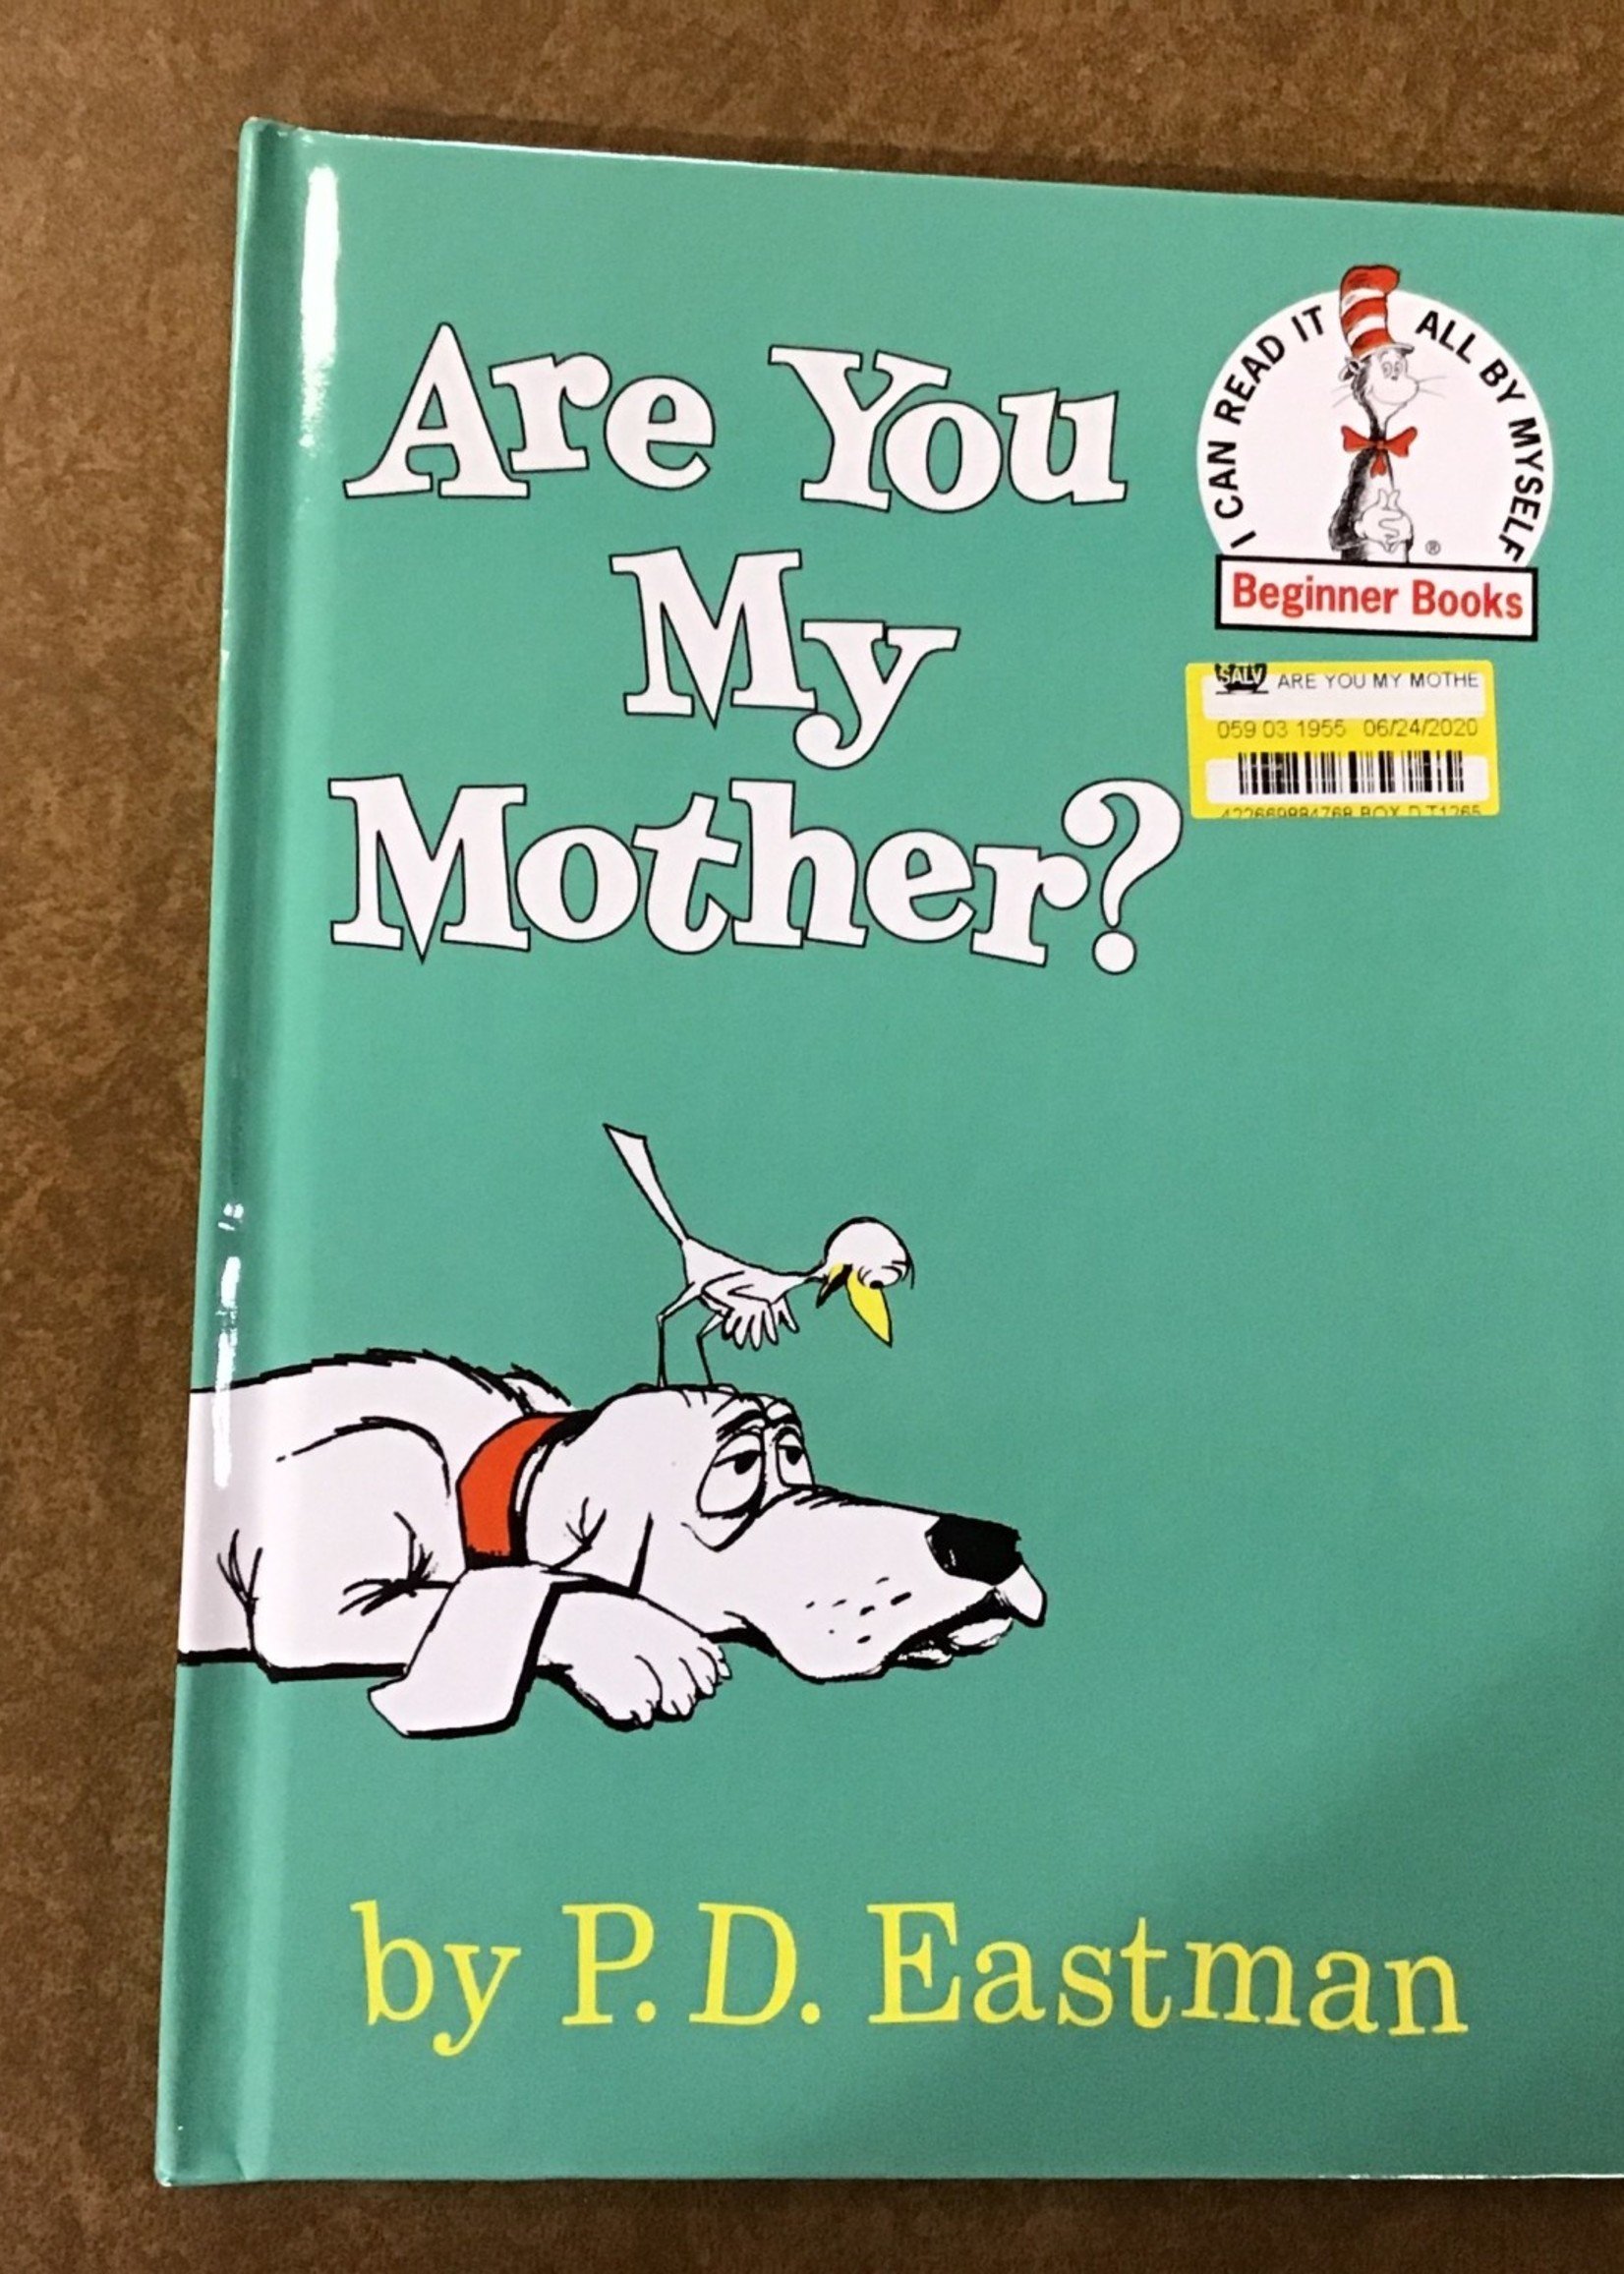 Are You My Mother Beginner Books By P D Eastman Hardcover By P D Eastman D3 Surplus Outlet